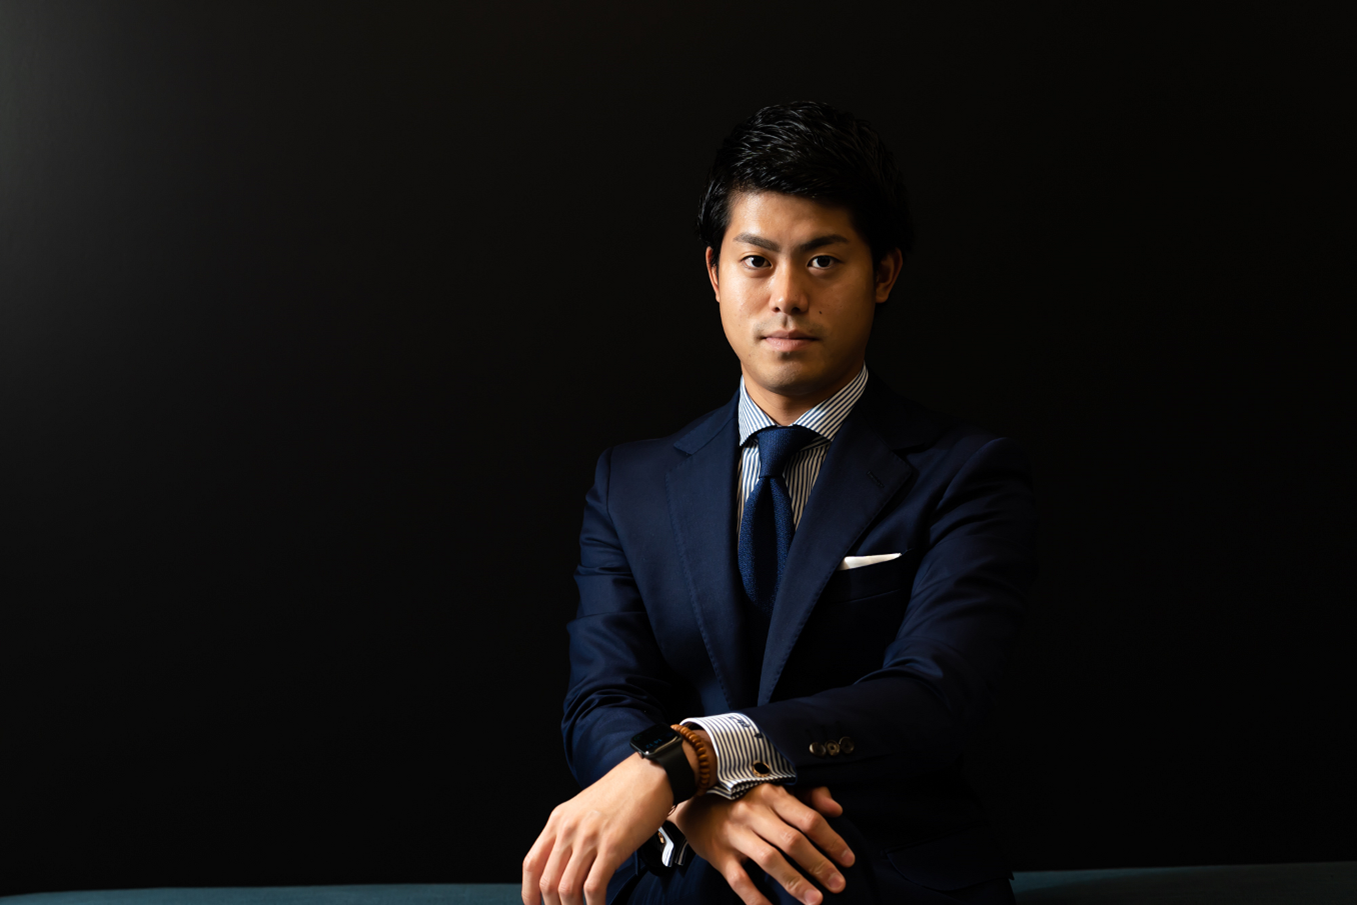 『Forbes 30 Under 30 Asia 2021』に株式会社プログリット 代表取締役社長 岡田祥吾が選出されました！